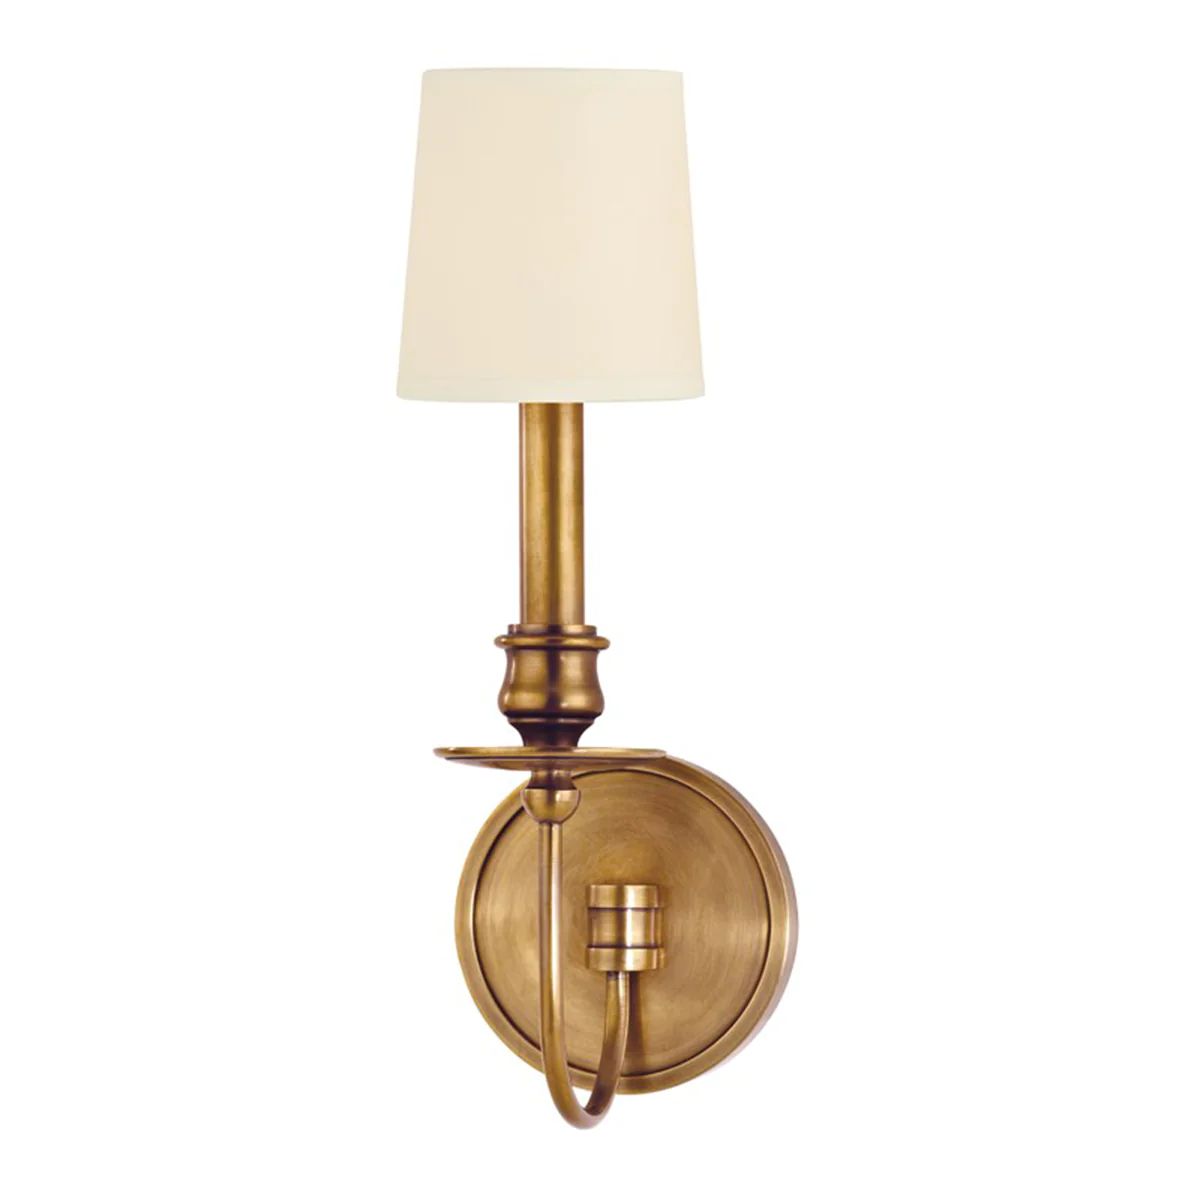 Cohasset Single Wall Sconce | Tuesday Made